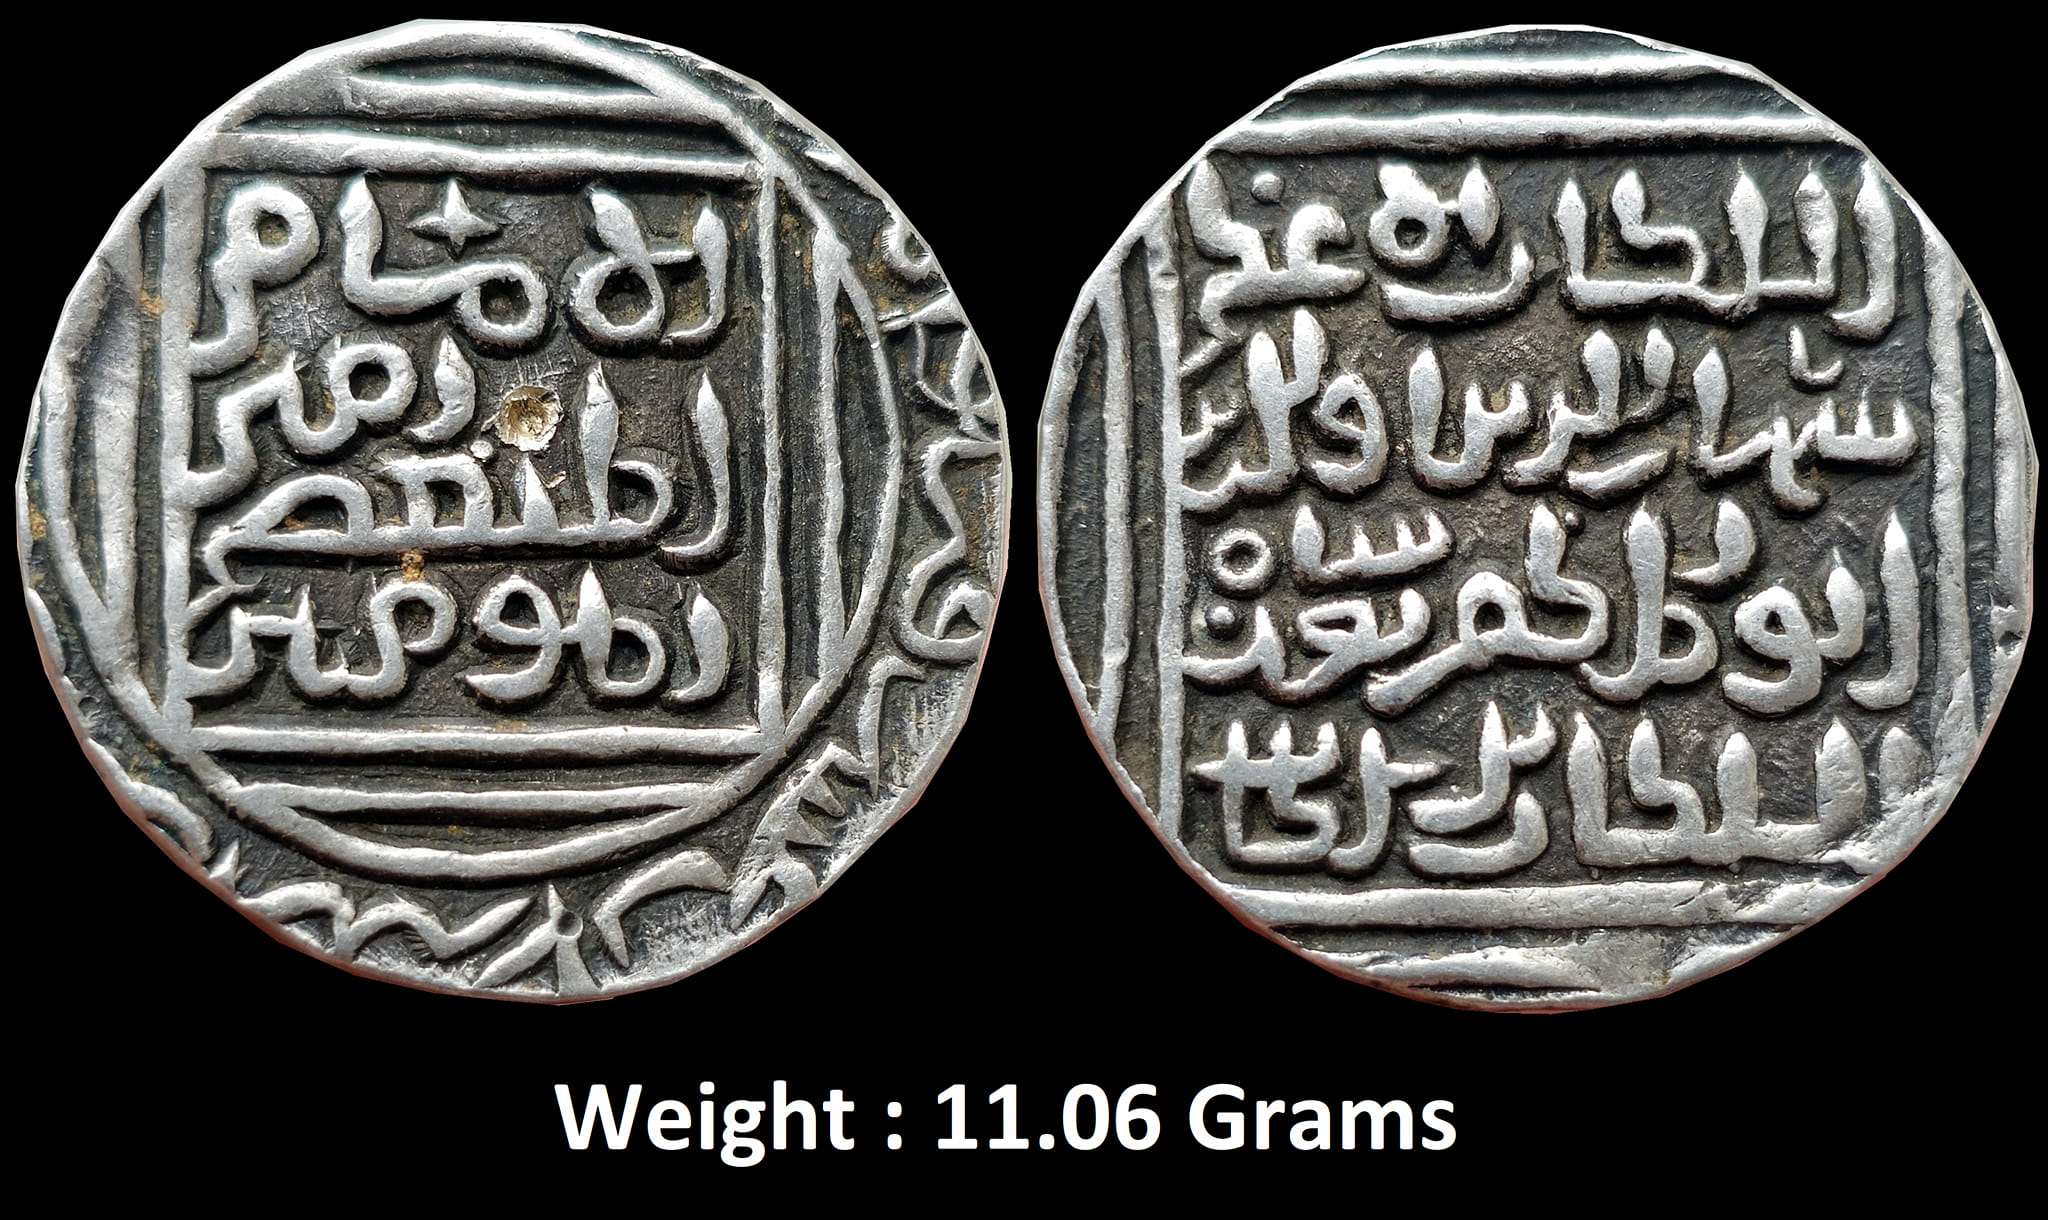 Bengal sultan : SHIHĀB AL-DĪN BUGHDA
( AH 717-718 / AD 1317-1318 )
Mint : Sunargaon ; Very Rare Silver Tanka
Bughda struck silver tankas in both Lakhnauti and Sunār- gãon. His coins are scarce and it is very difficult to find them with a clear mint and date. There is one basic type though there is variation in the ornament above the second mim of al-imām on the reverse. His titles are as follows:
" al sultan al-azam shihab al-dunya wal din abul muzaffar bughda shah al-sultan bin sultan "